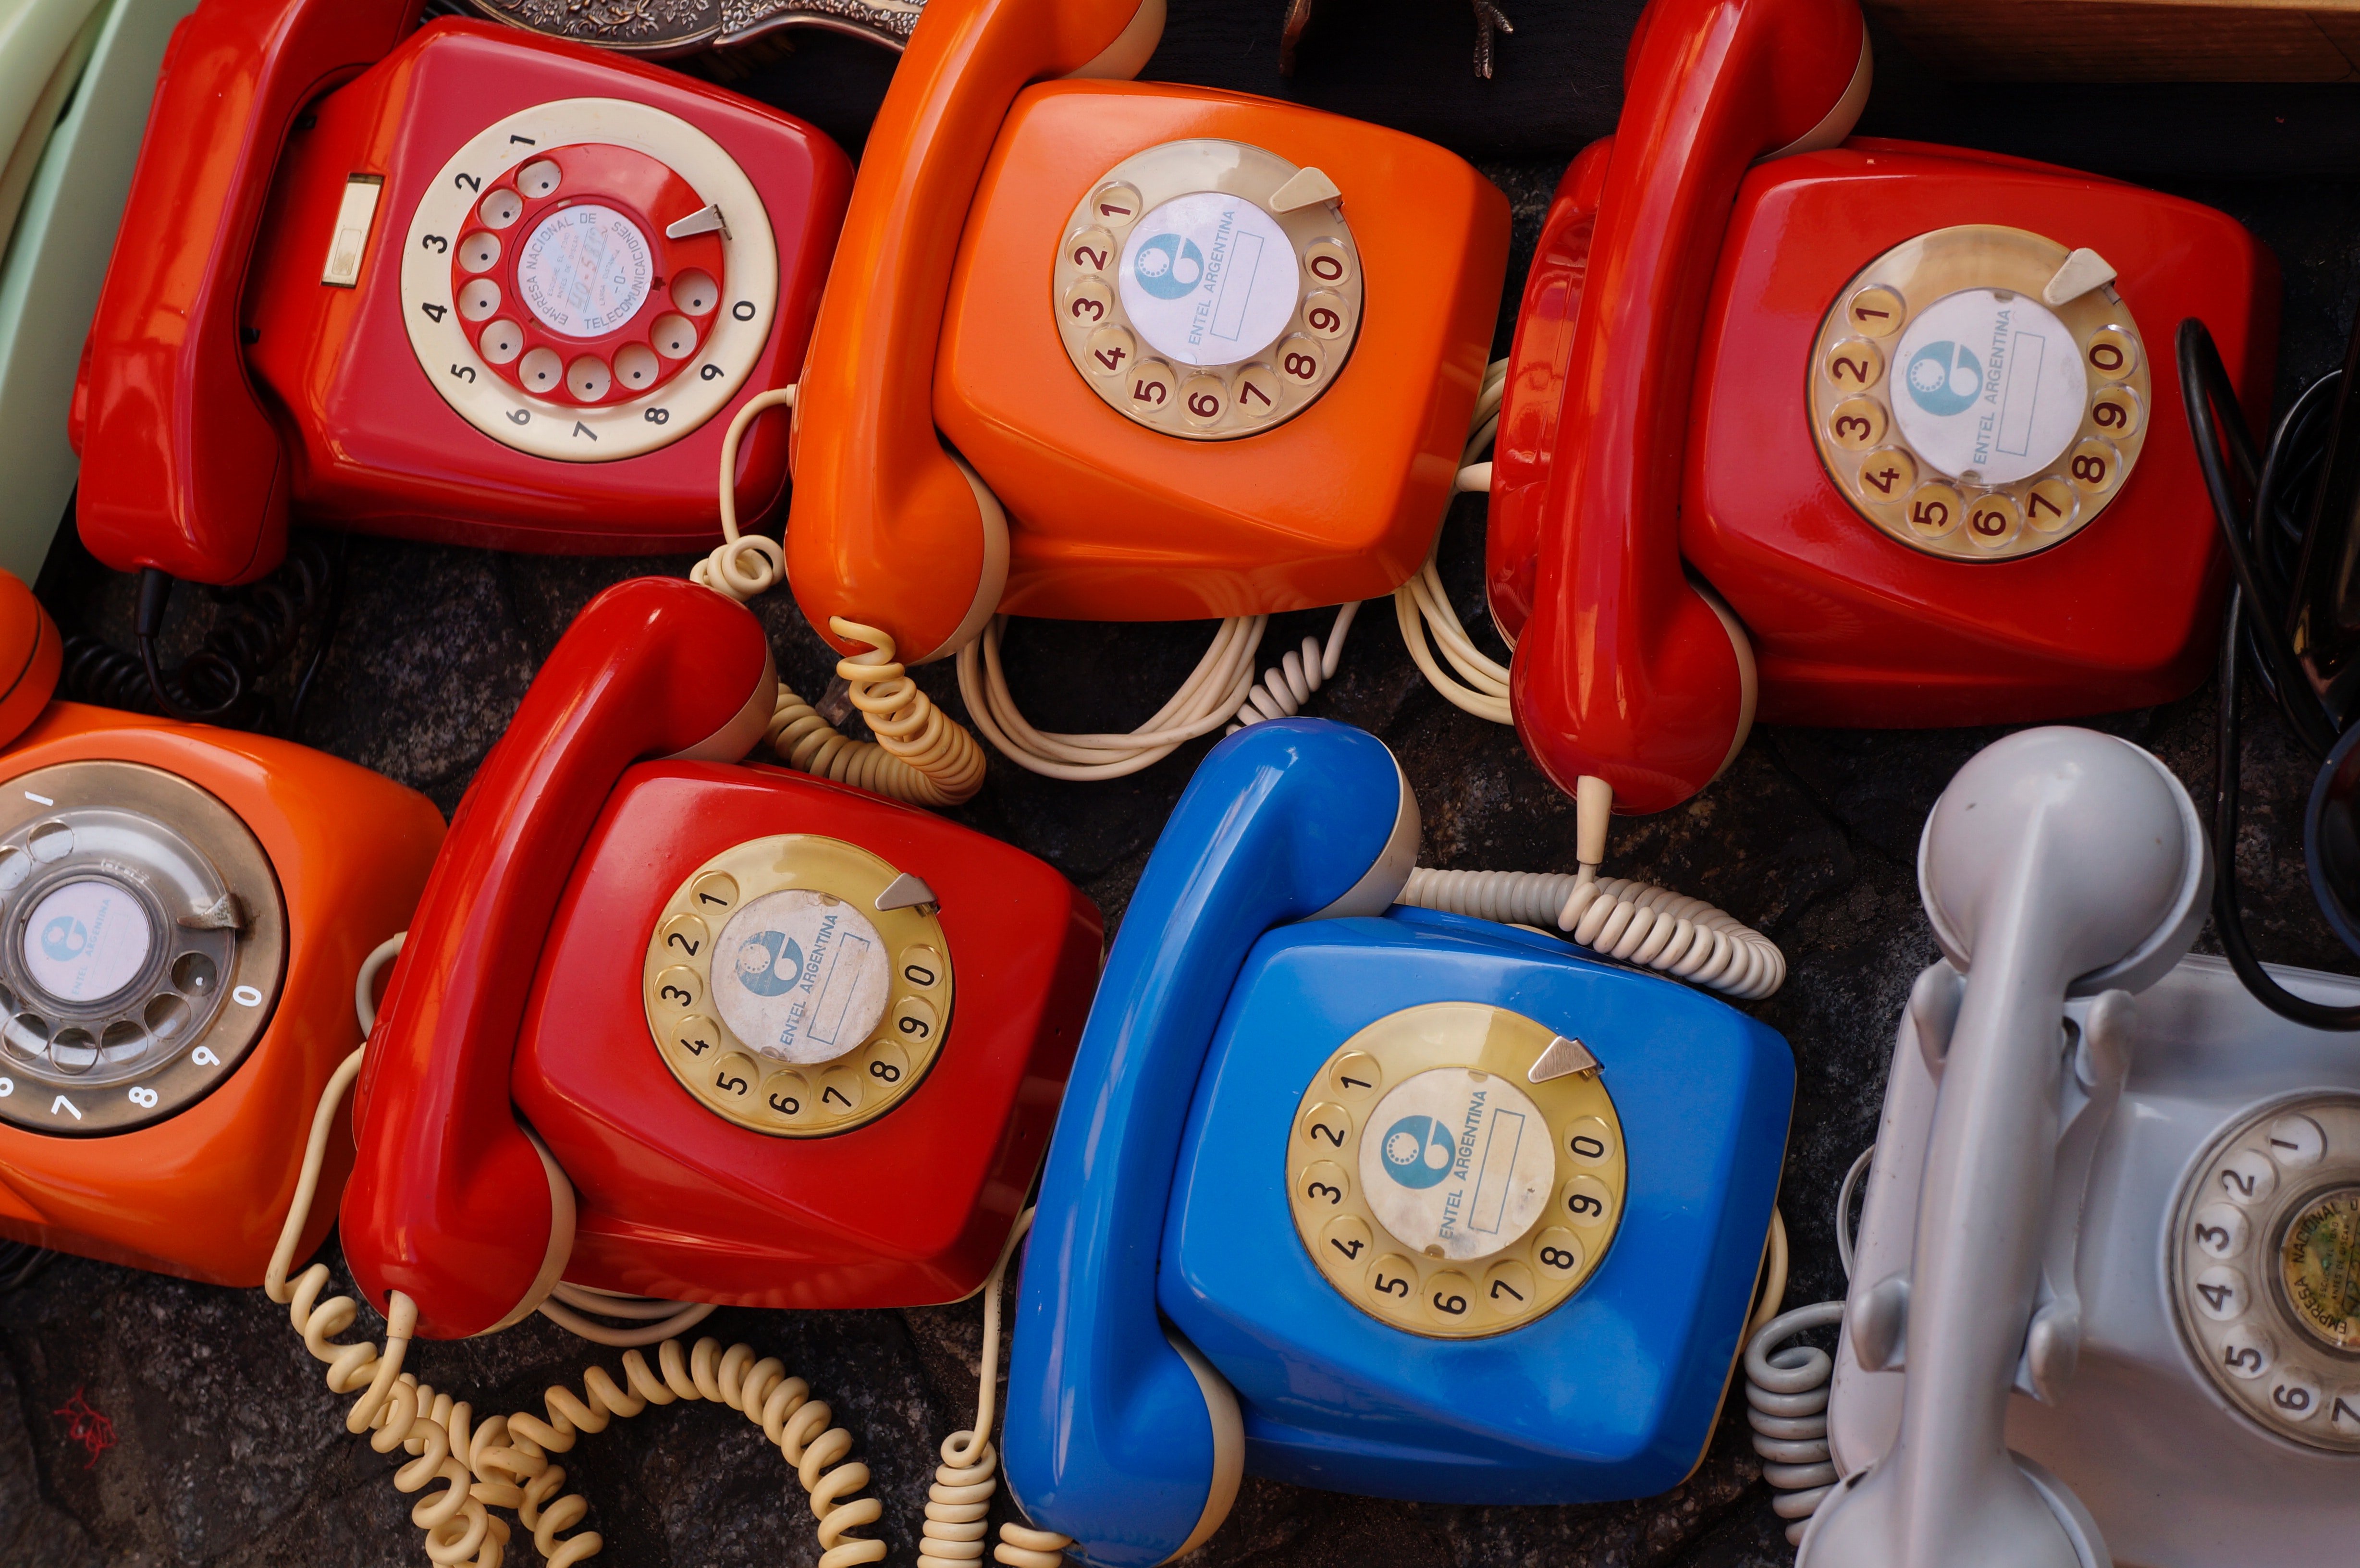 Seven assorted colored rotary telephones photo